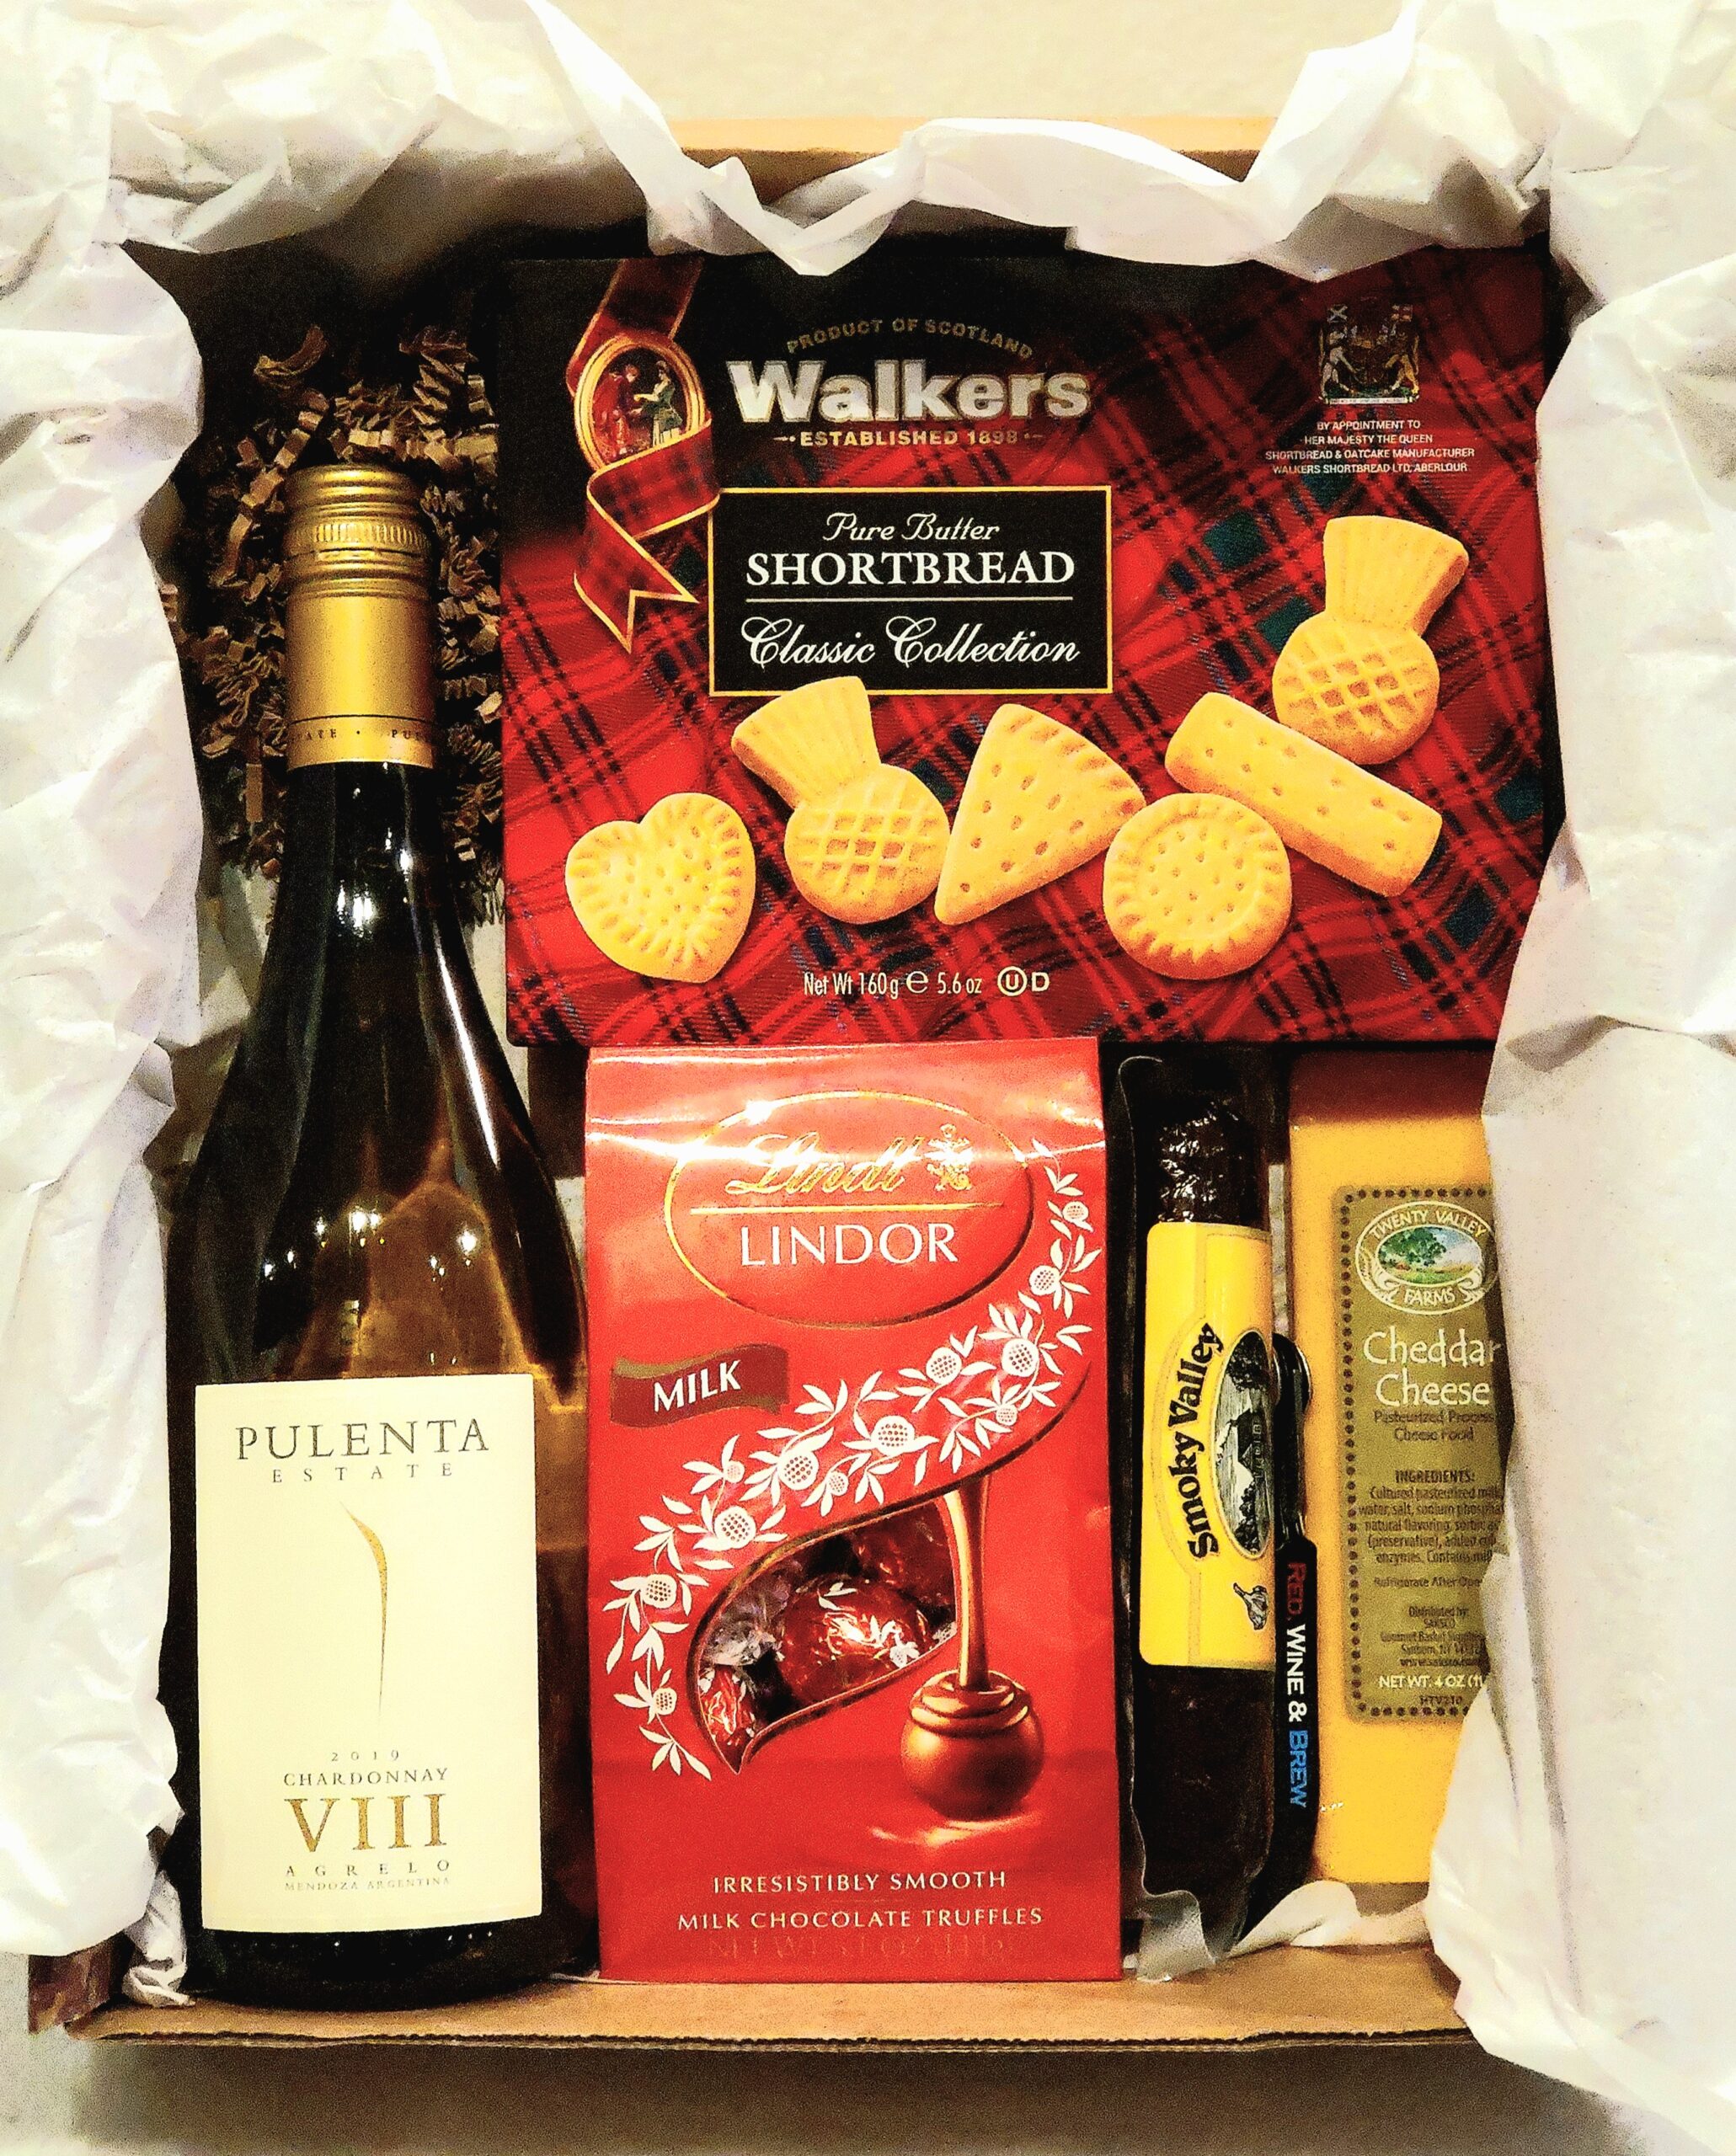 A box filled with crinkle cut paper with a white wine bottle, chocolates, sausage, cheese, and crackers.